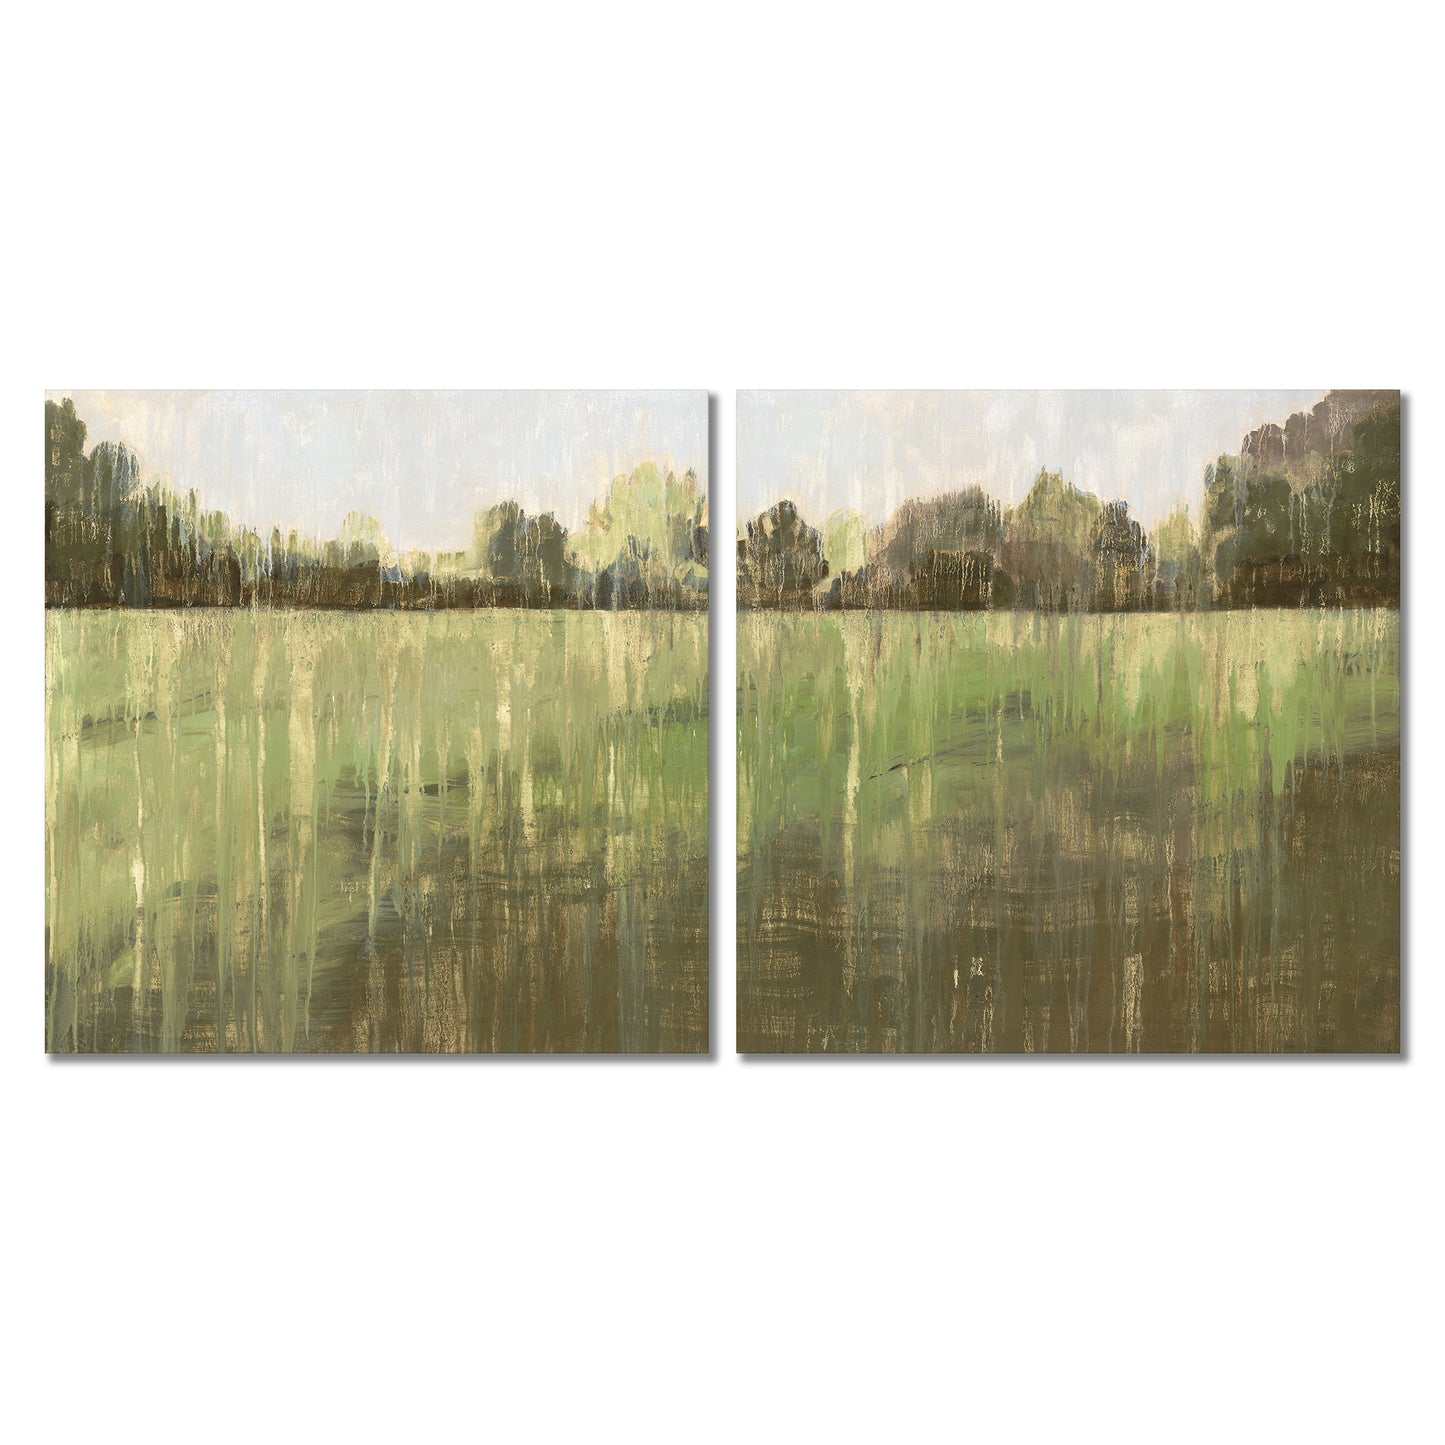 Green Field by PI Creative - 2 Piece Gallery Wrapped Canvas Set - Art Set - Americanflat